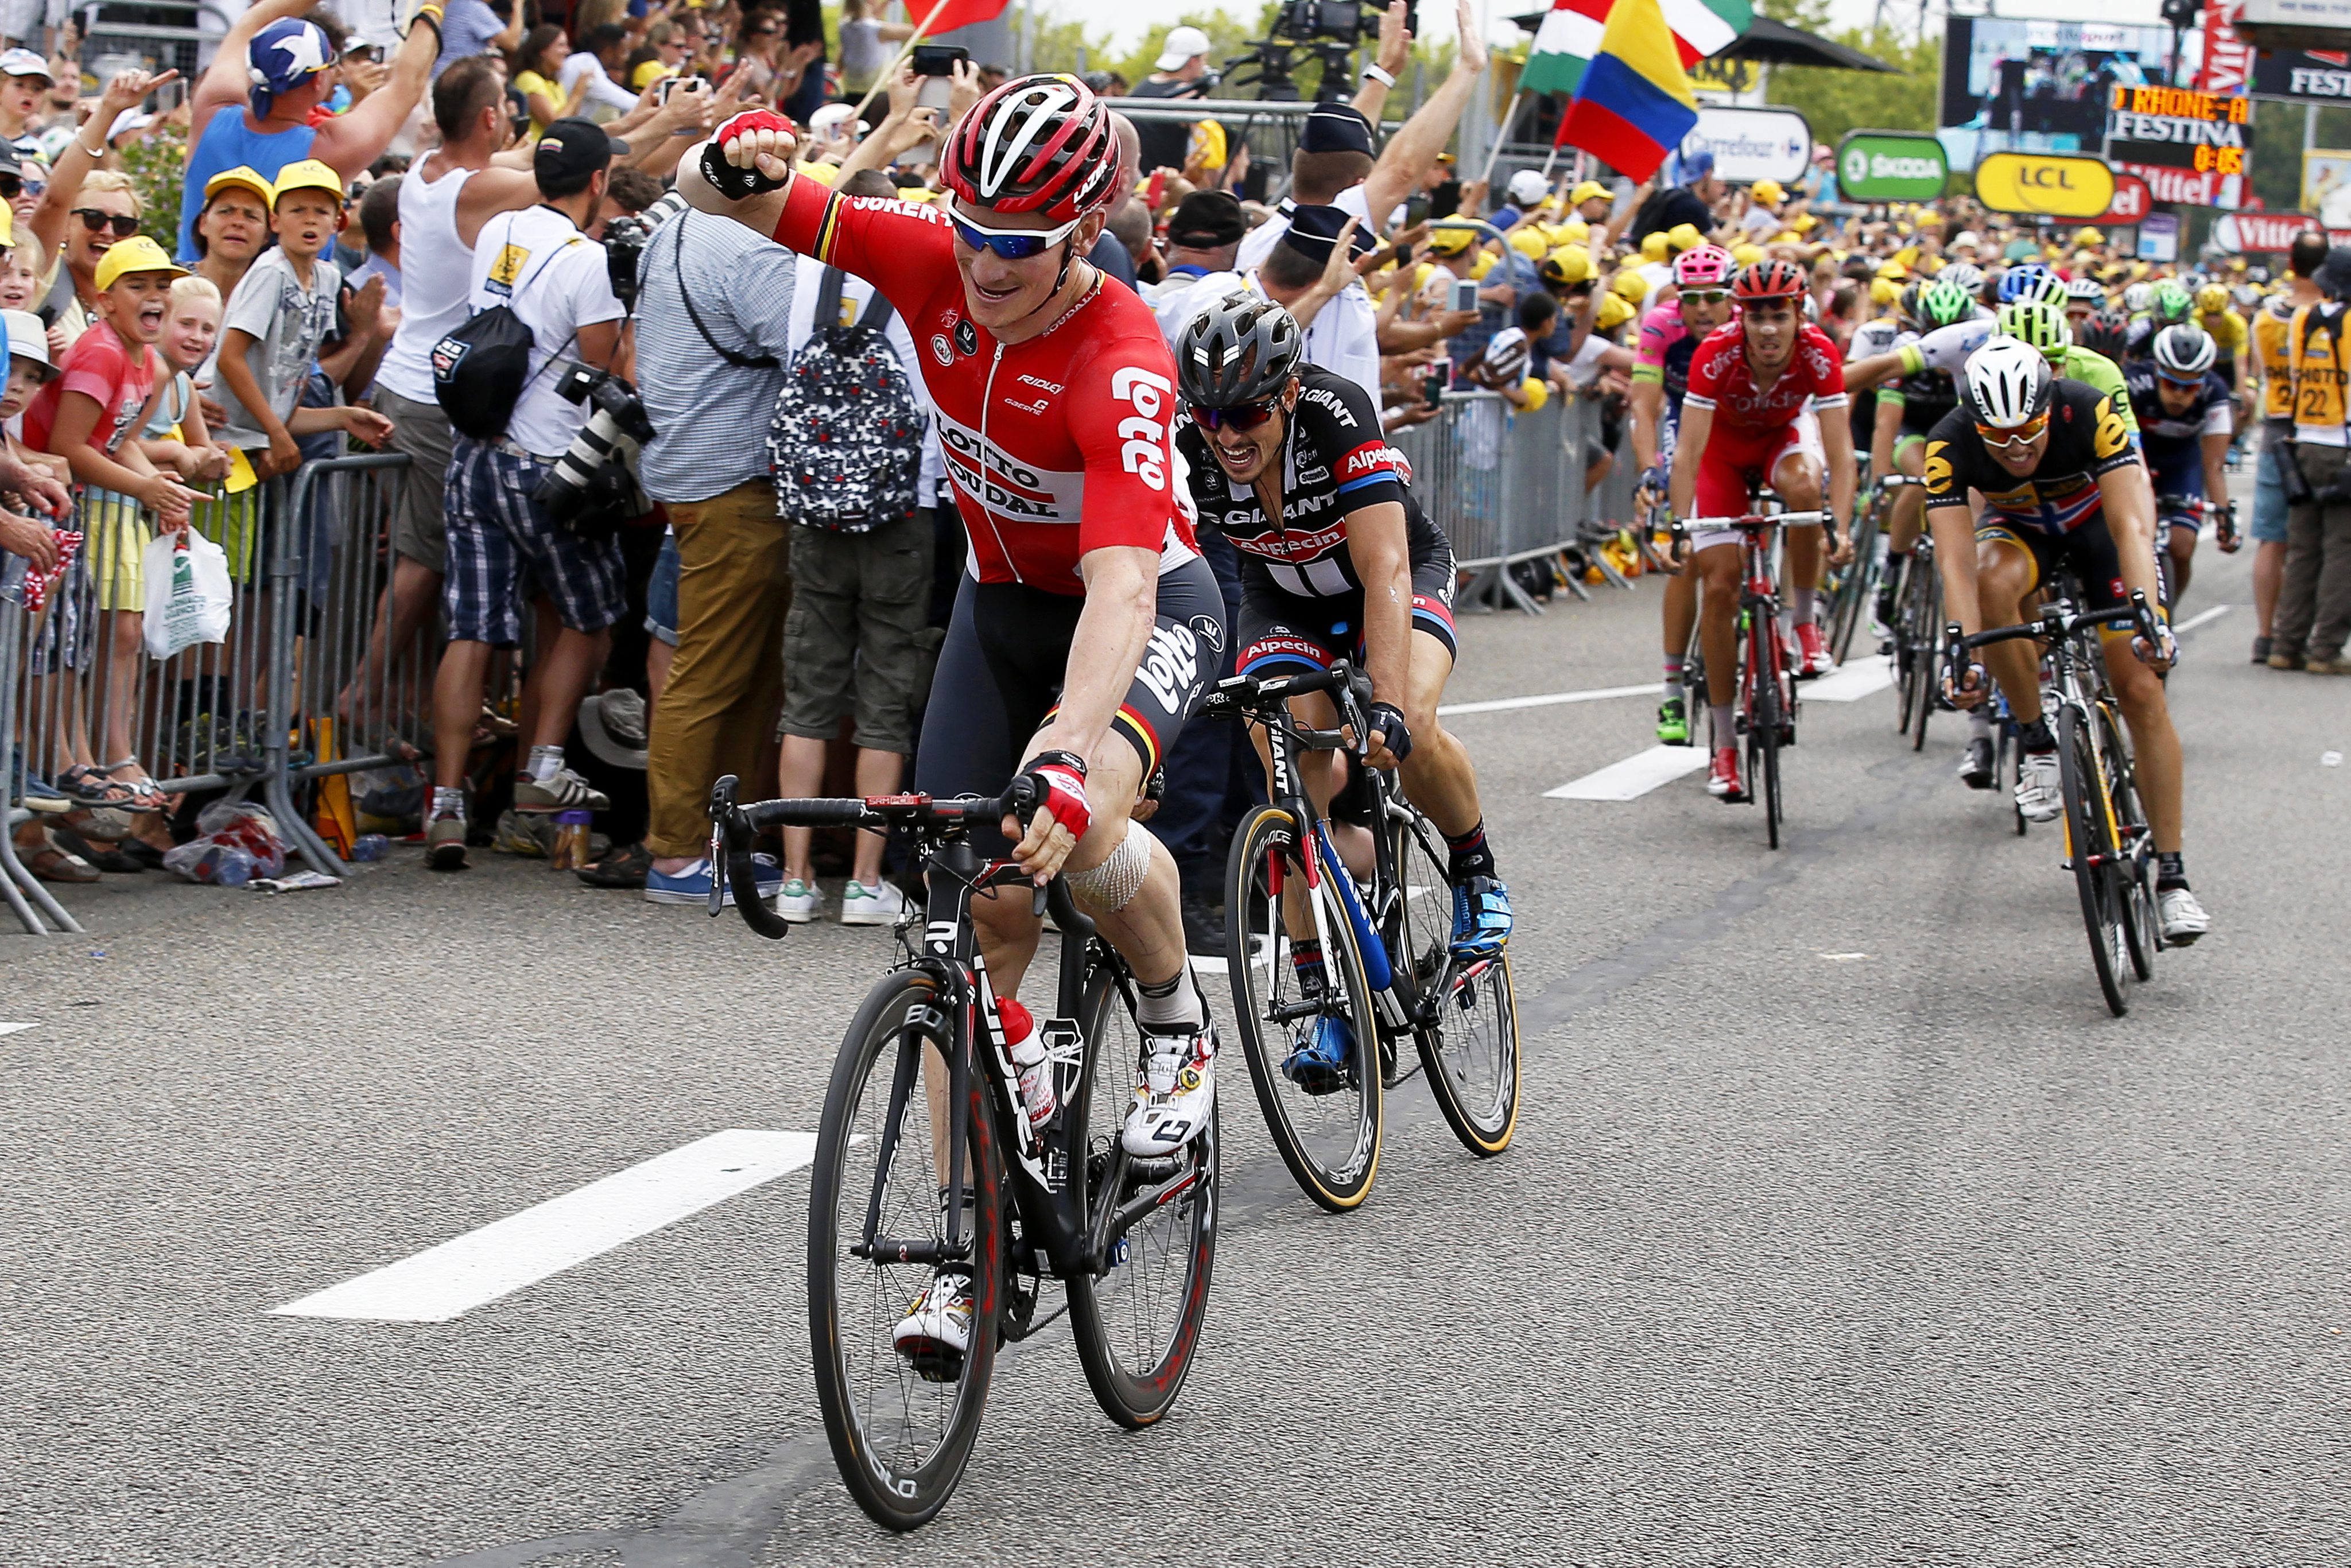 Lotto Soudal team rider Andre Greipel of Germany celebrates winning the Tour de France stage from Mende to Valence. Photo: EPA
